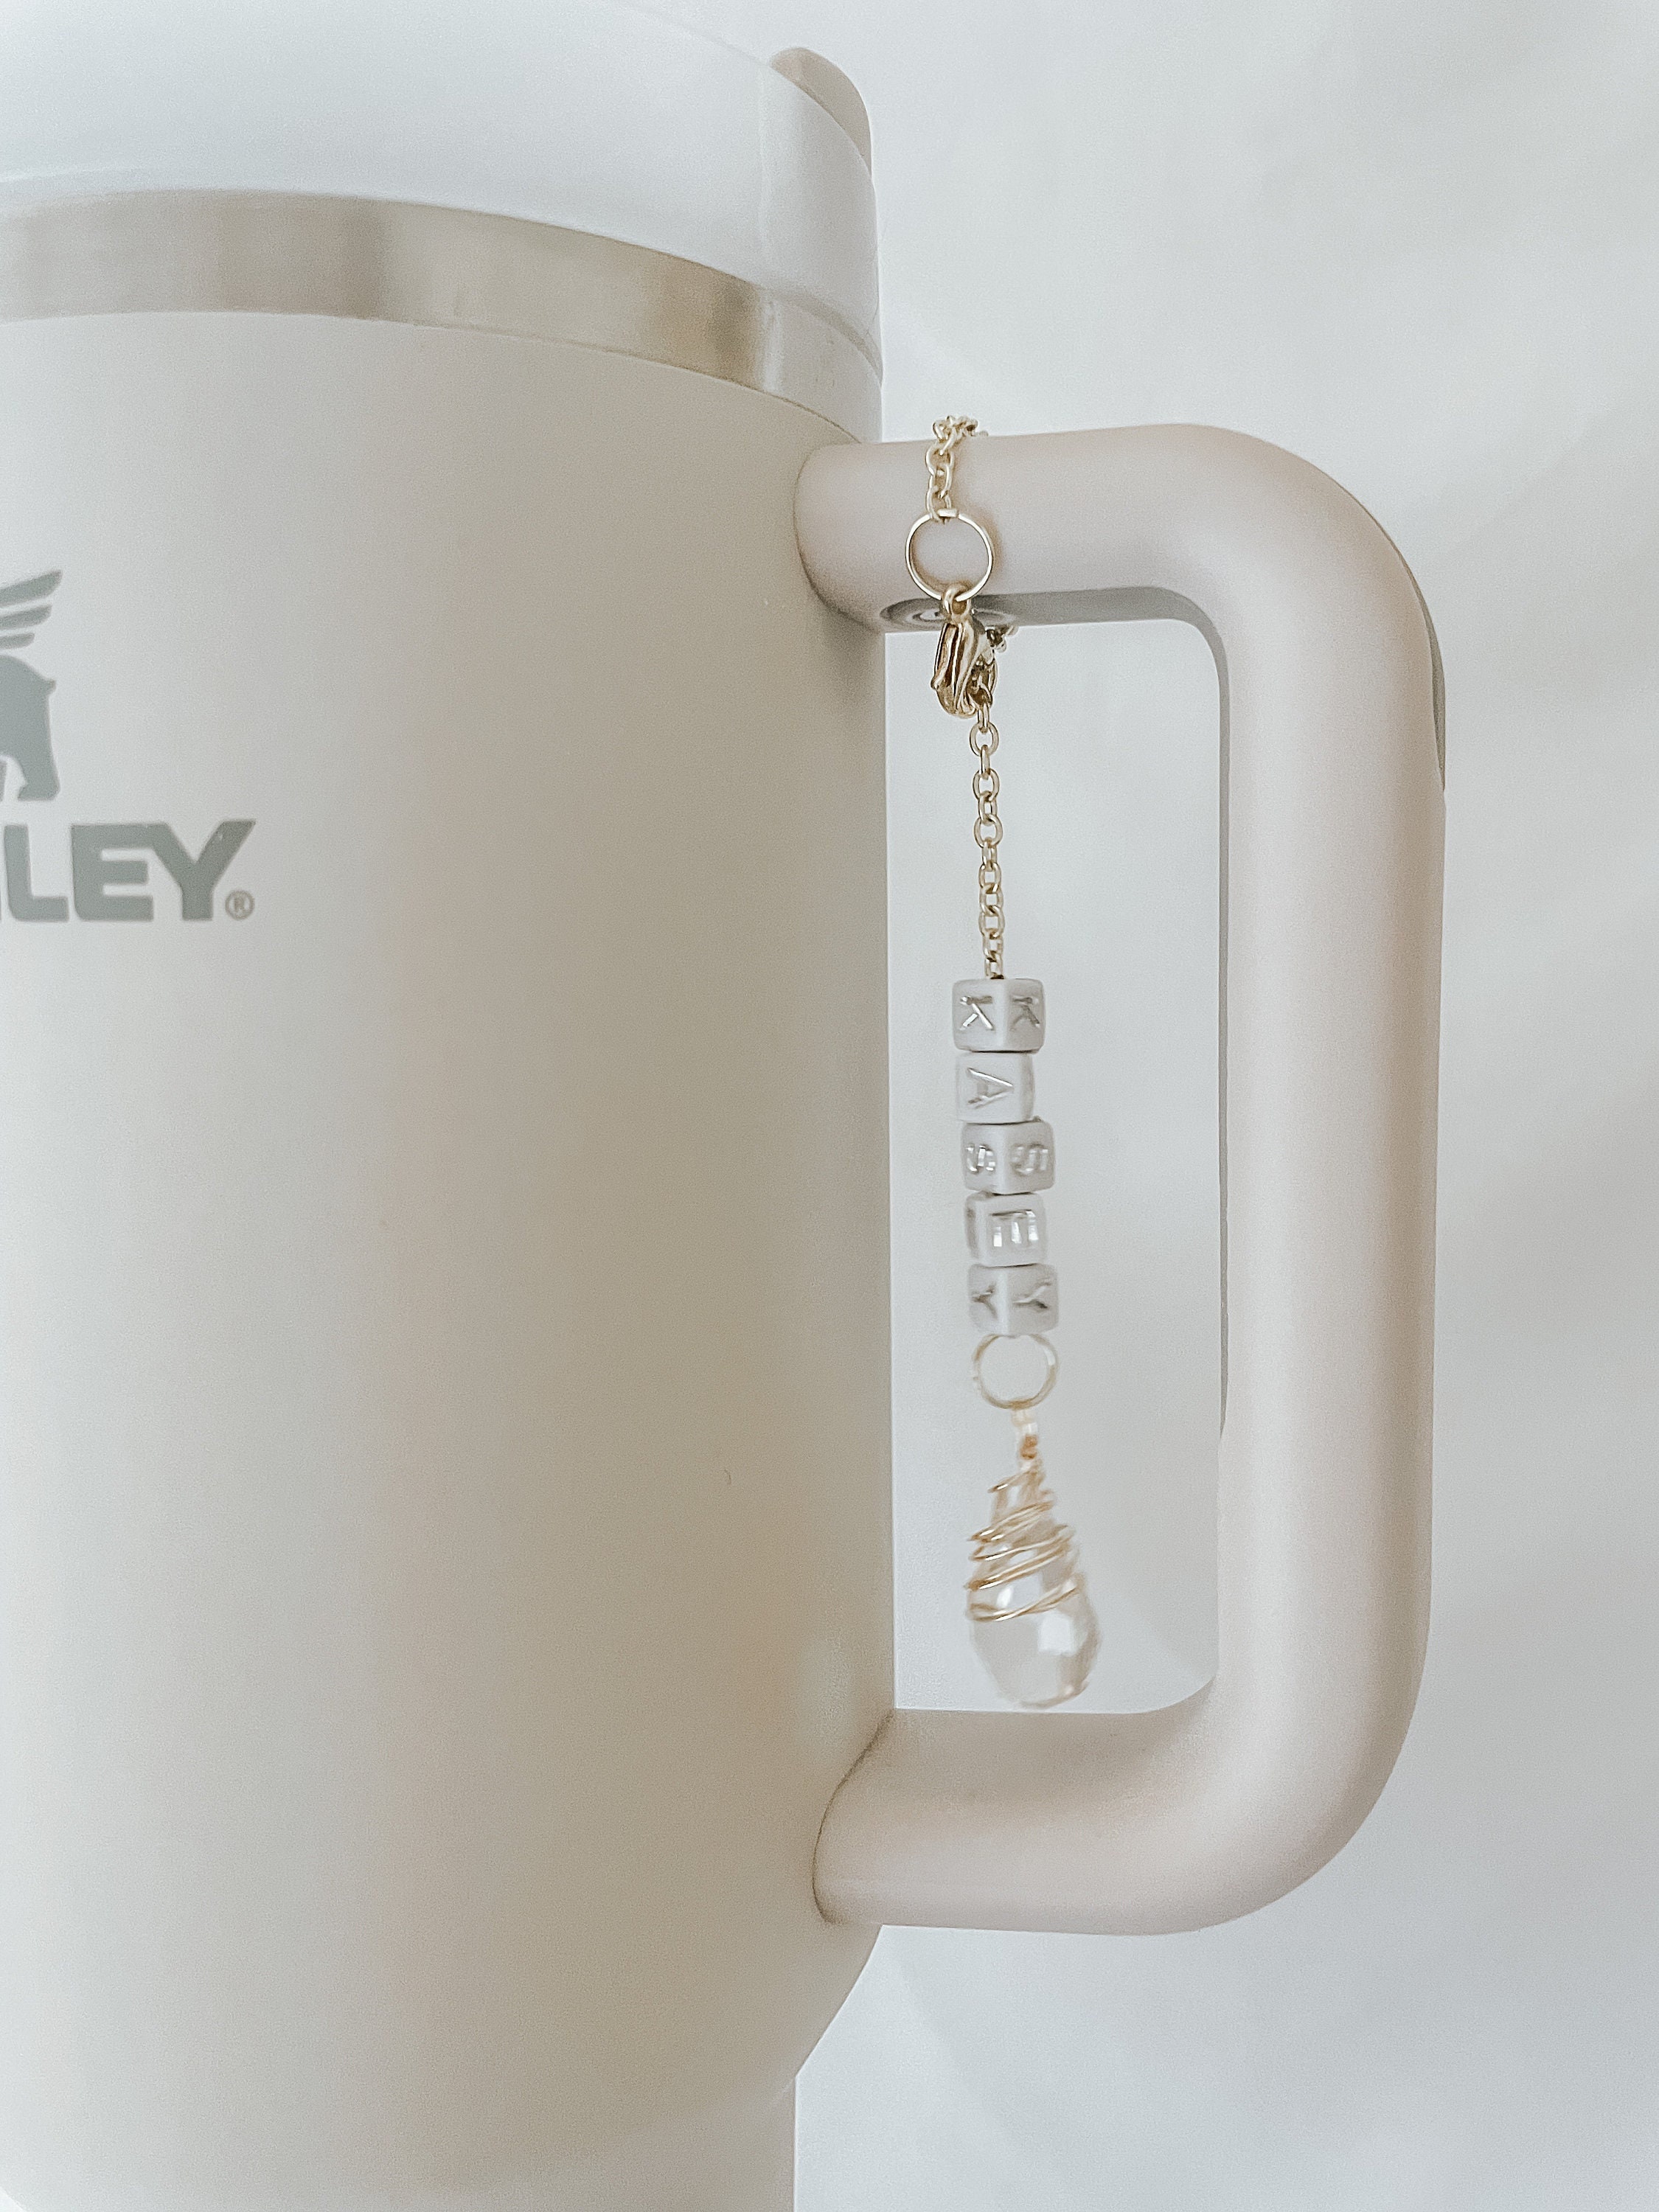 Stanley Tumbler Cup Charm Accessories for Water Bottle Stanley Cup Tumbler  Handle Charm Stanley Accessories Water Bottle Charm Accessories